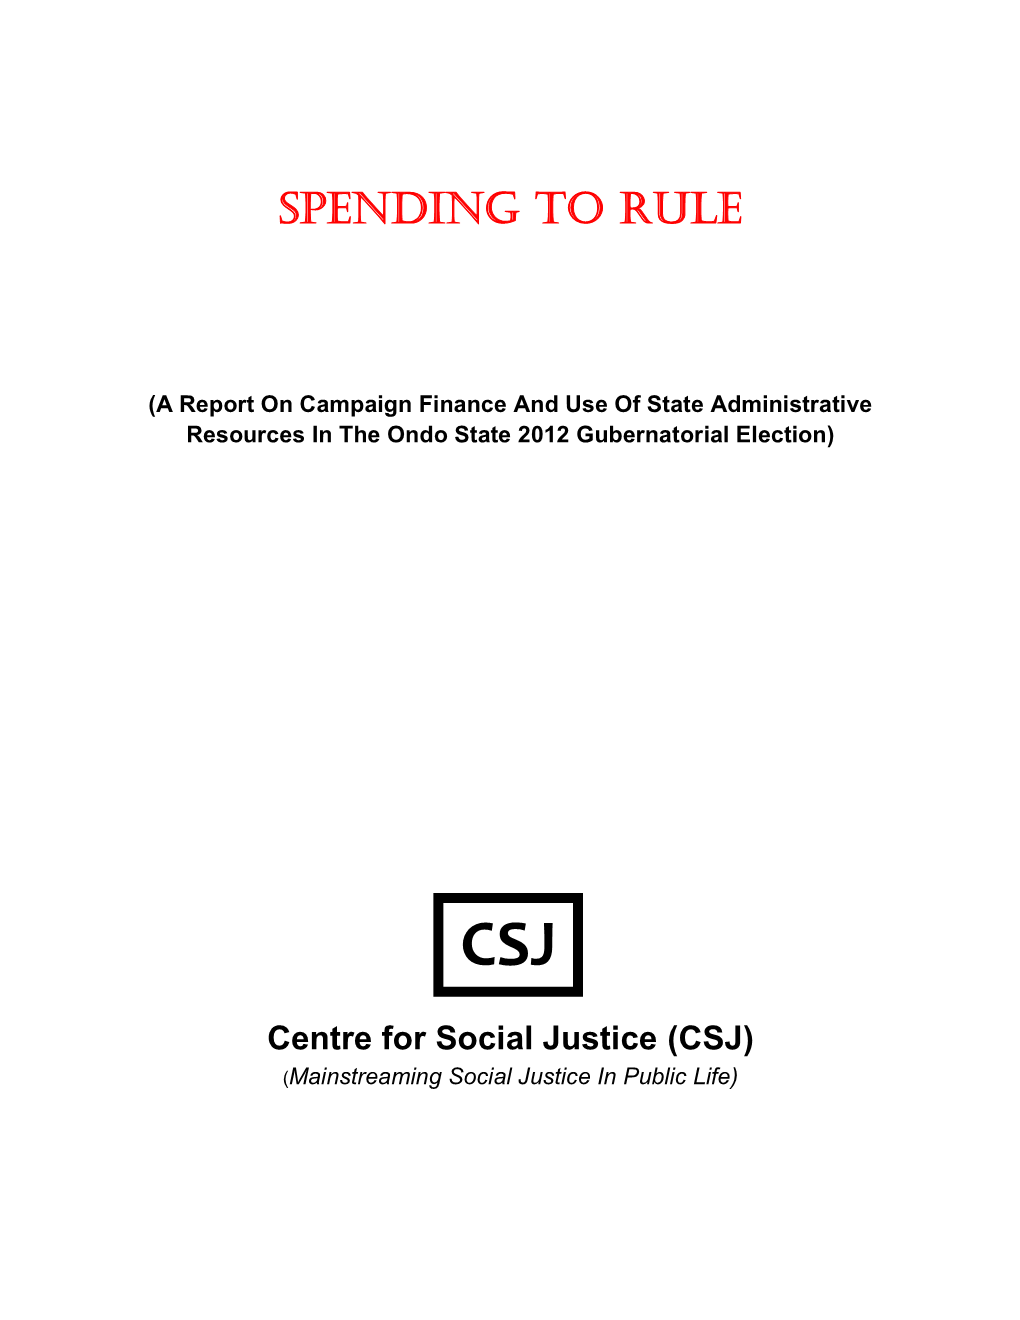 SPENDING to RULE (A Report on Campaign Finance and Use